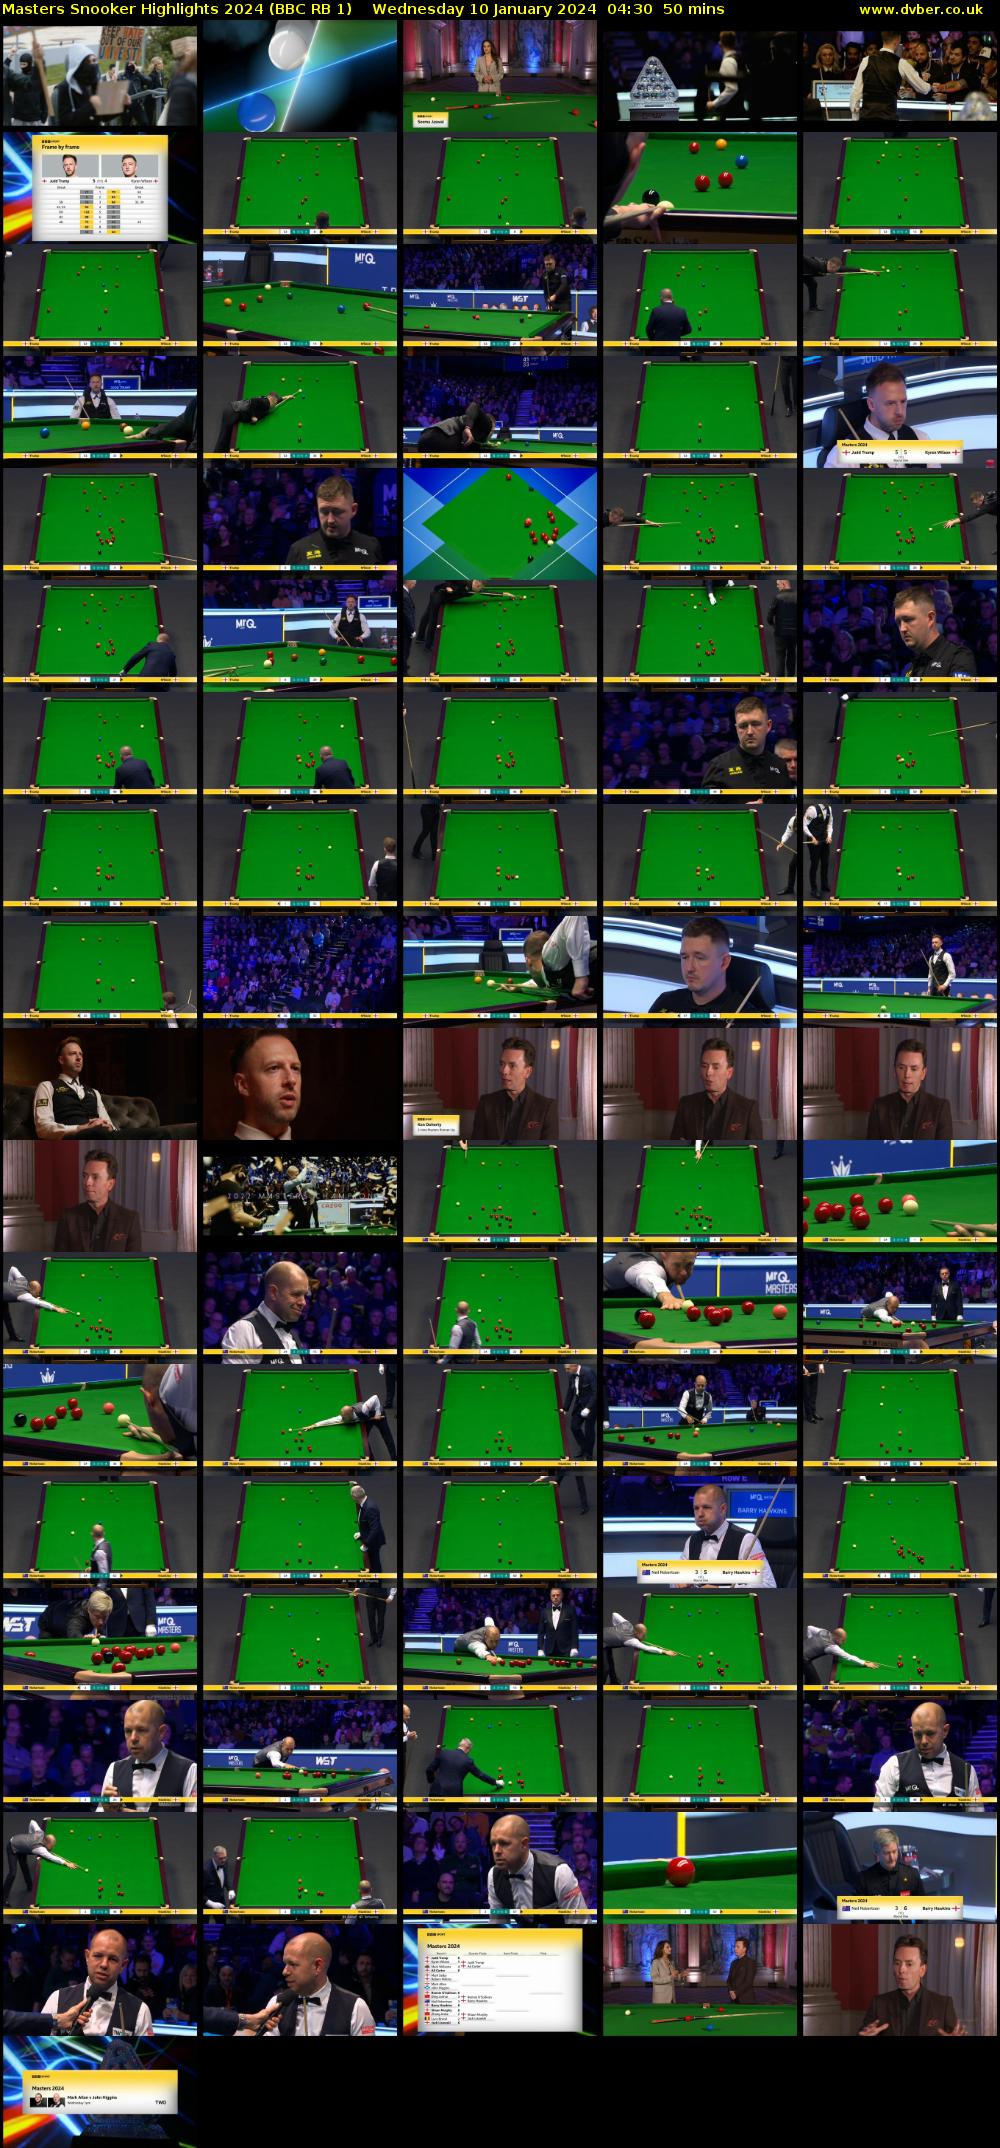 Masters Snooker Highlights 2024 (BBC RB 1) Wednesday 10 January 2024 04:30 - 05:20